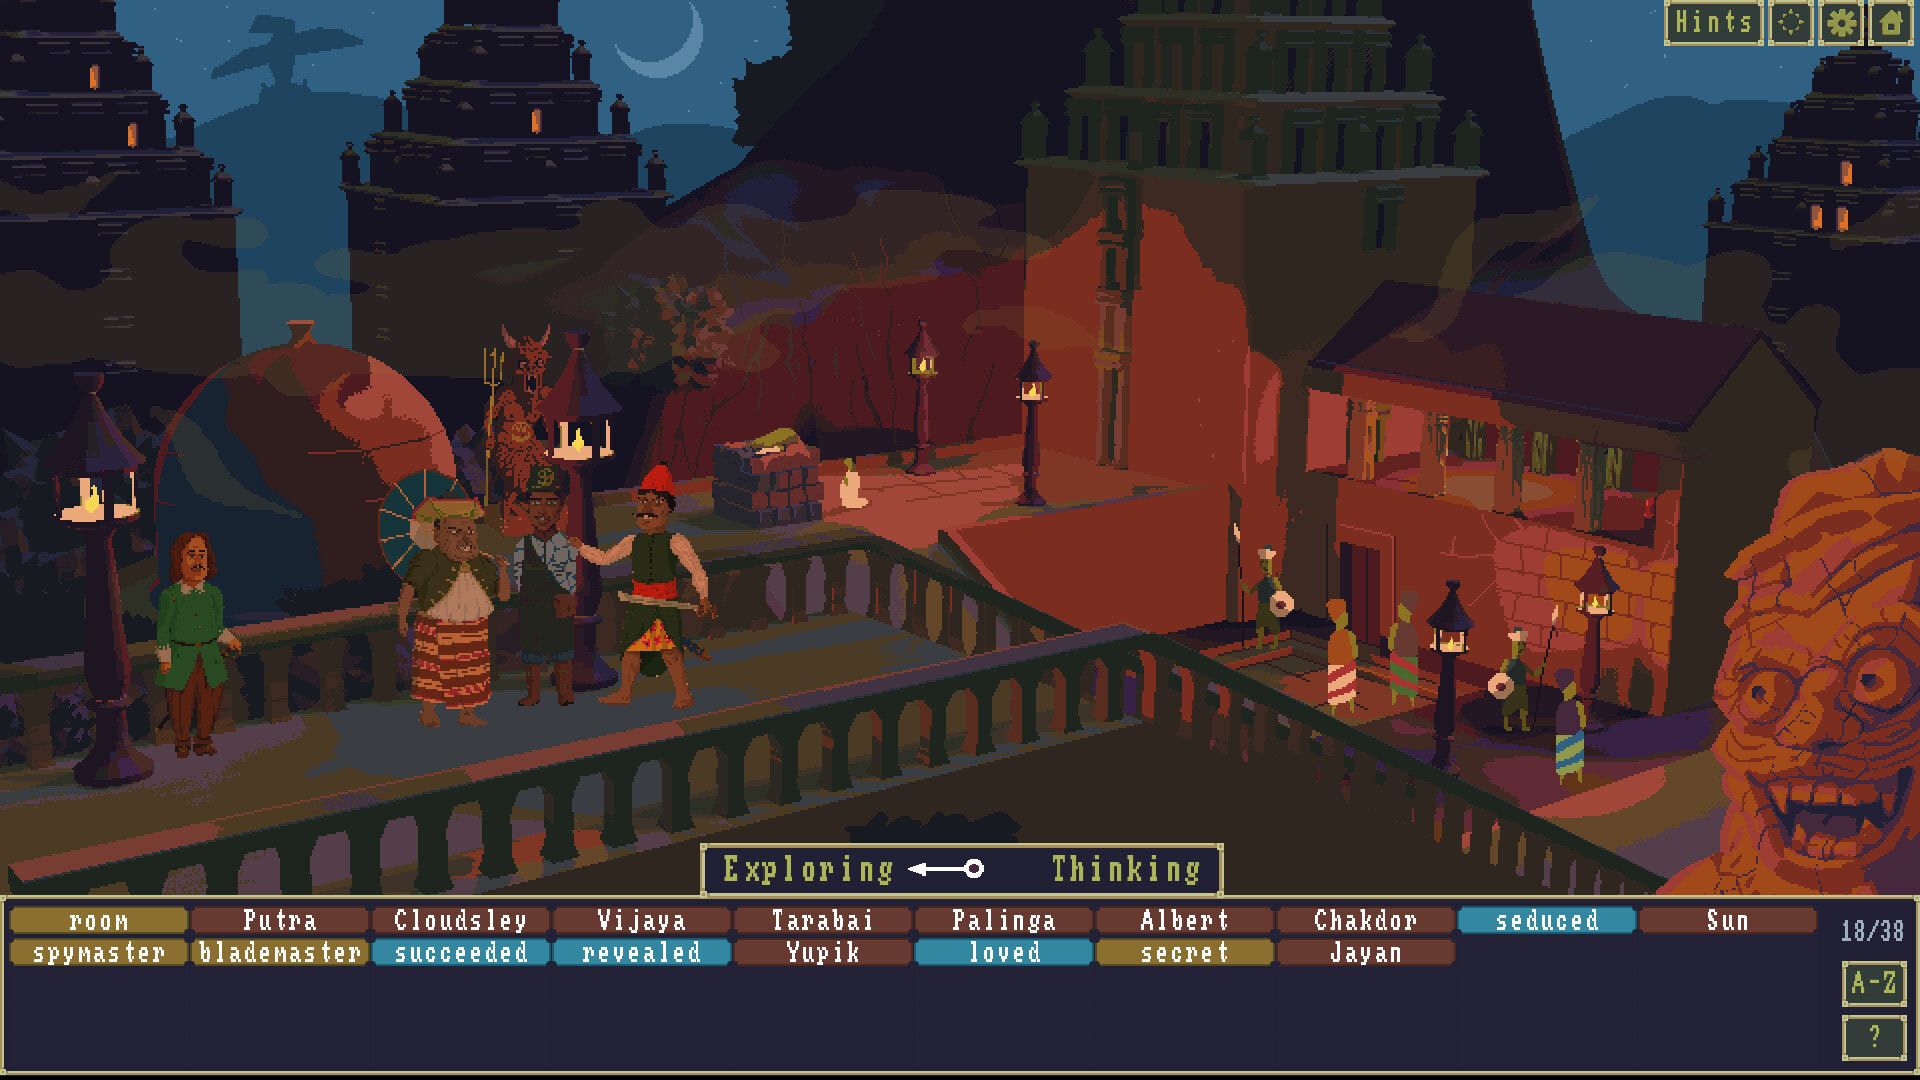 Video game screenshot of people in a town at night. Words below them list names and verbs that can be combined to explain what is happening